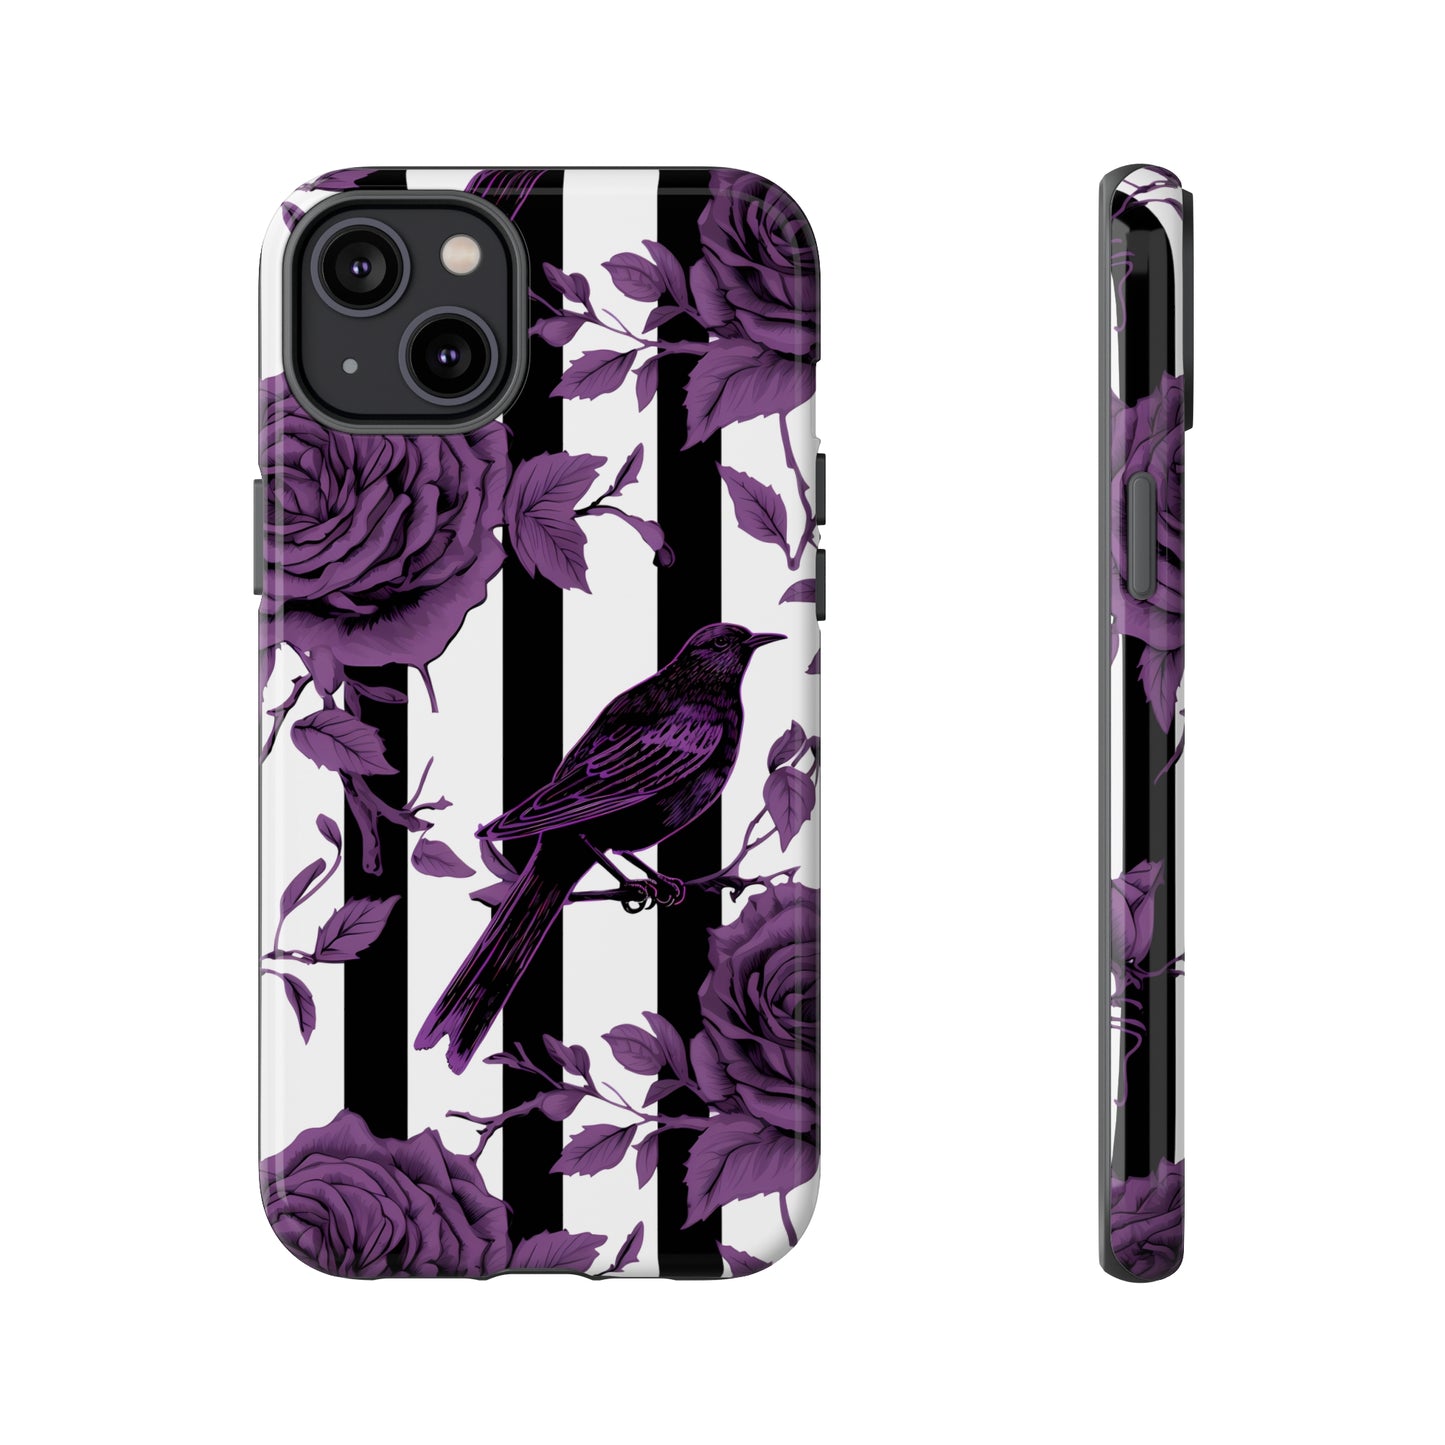 Striped Crows and Roses Tough Cases for iPhone Samsung Google PhonesPhone CaseVTZdesignsiPhone 14 PlusGlossyAccessoriescrowsGlossy